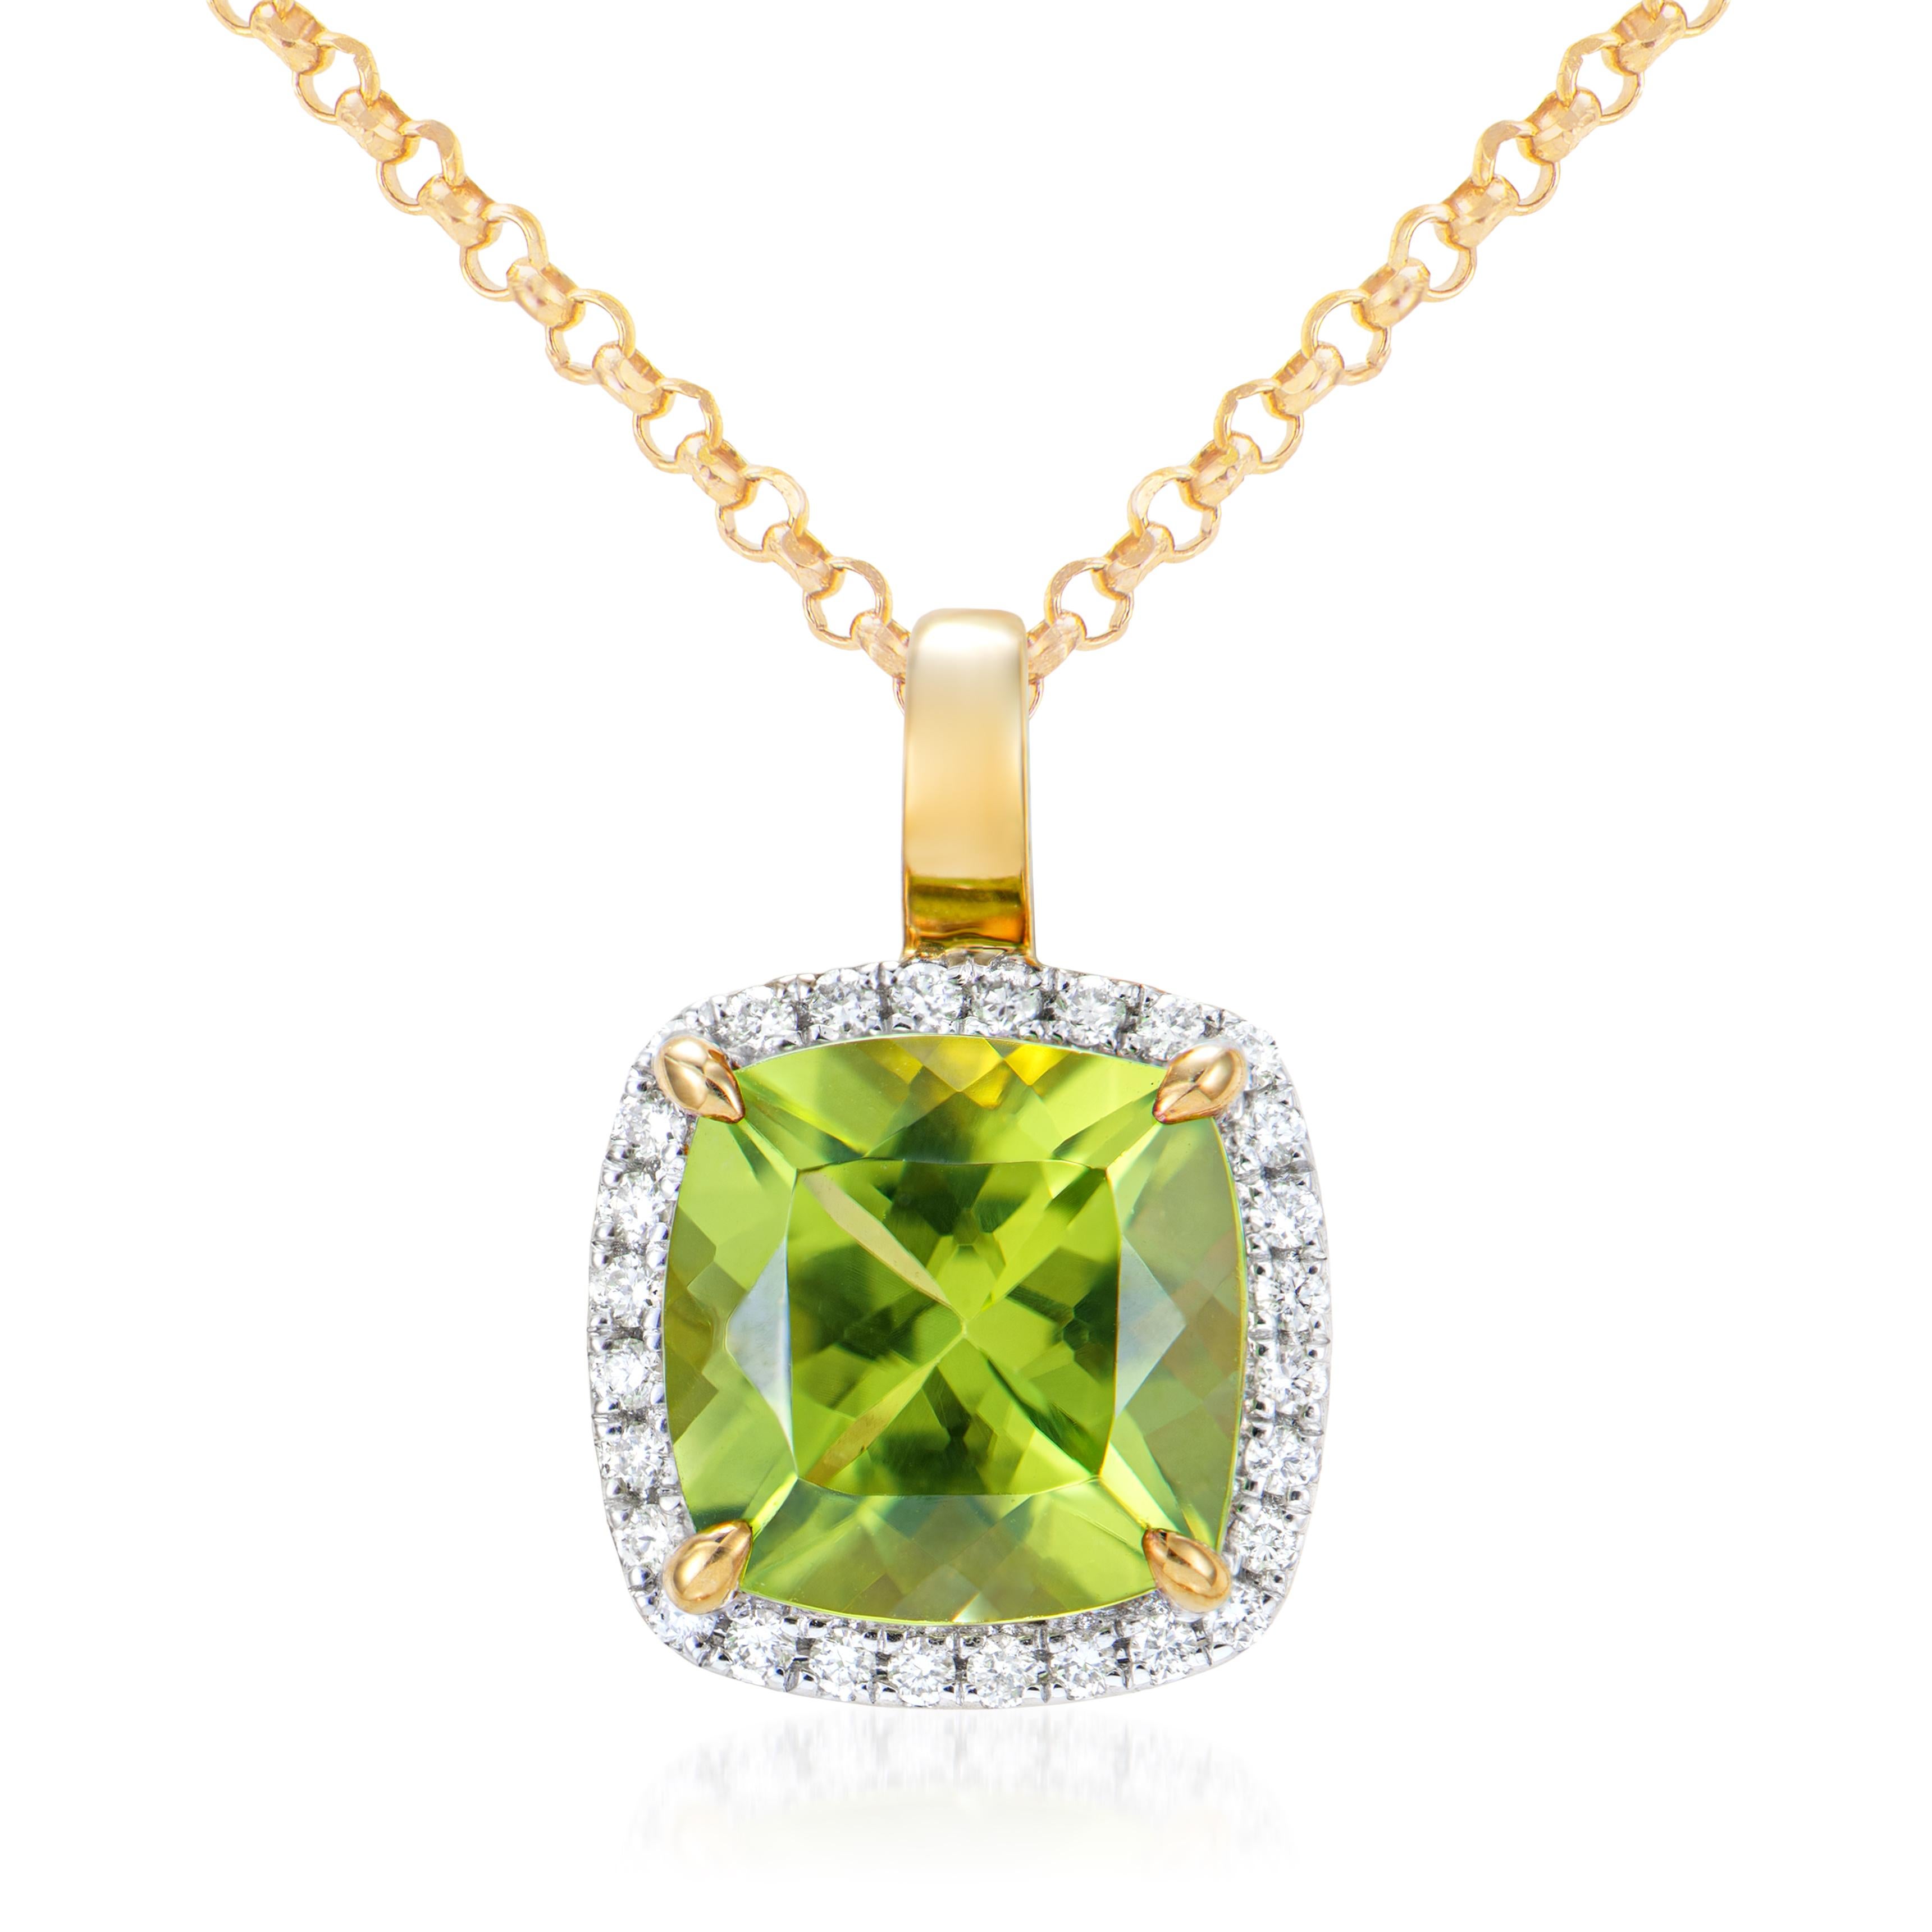 Presented A lovely collection of gems, including Amethyst, Peridot, Rhodolite, Sky Blue Topaz, Swiss Blue Topaz and Morganite is perfect for people who value quality and want to wear it to any occasion or celebration. The yellow gold Peridot Pendant